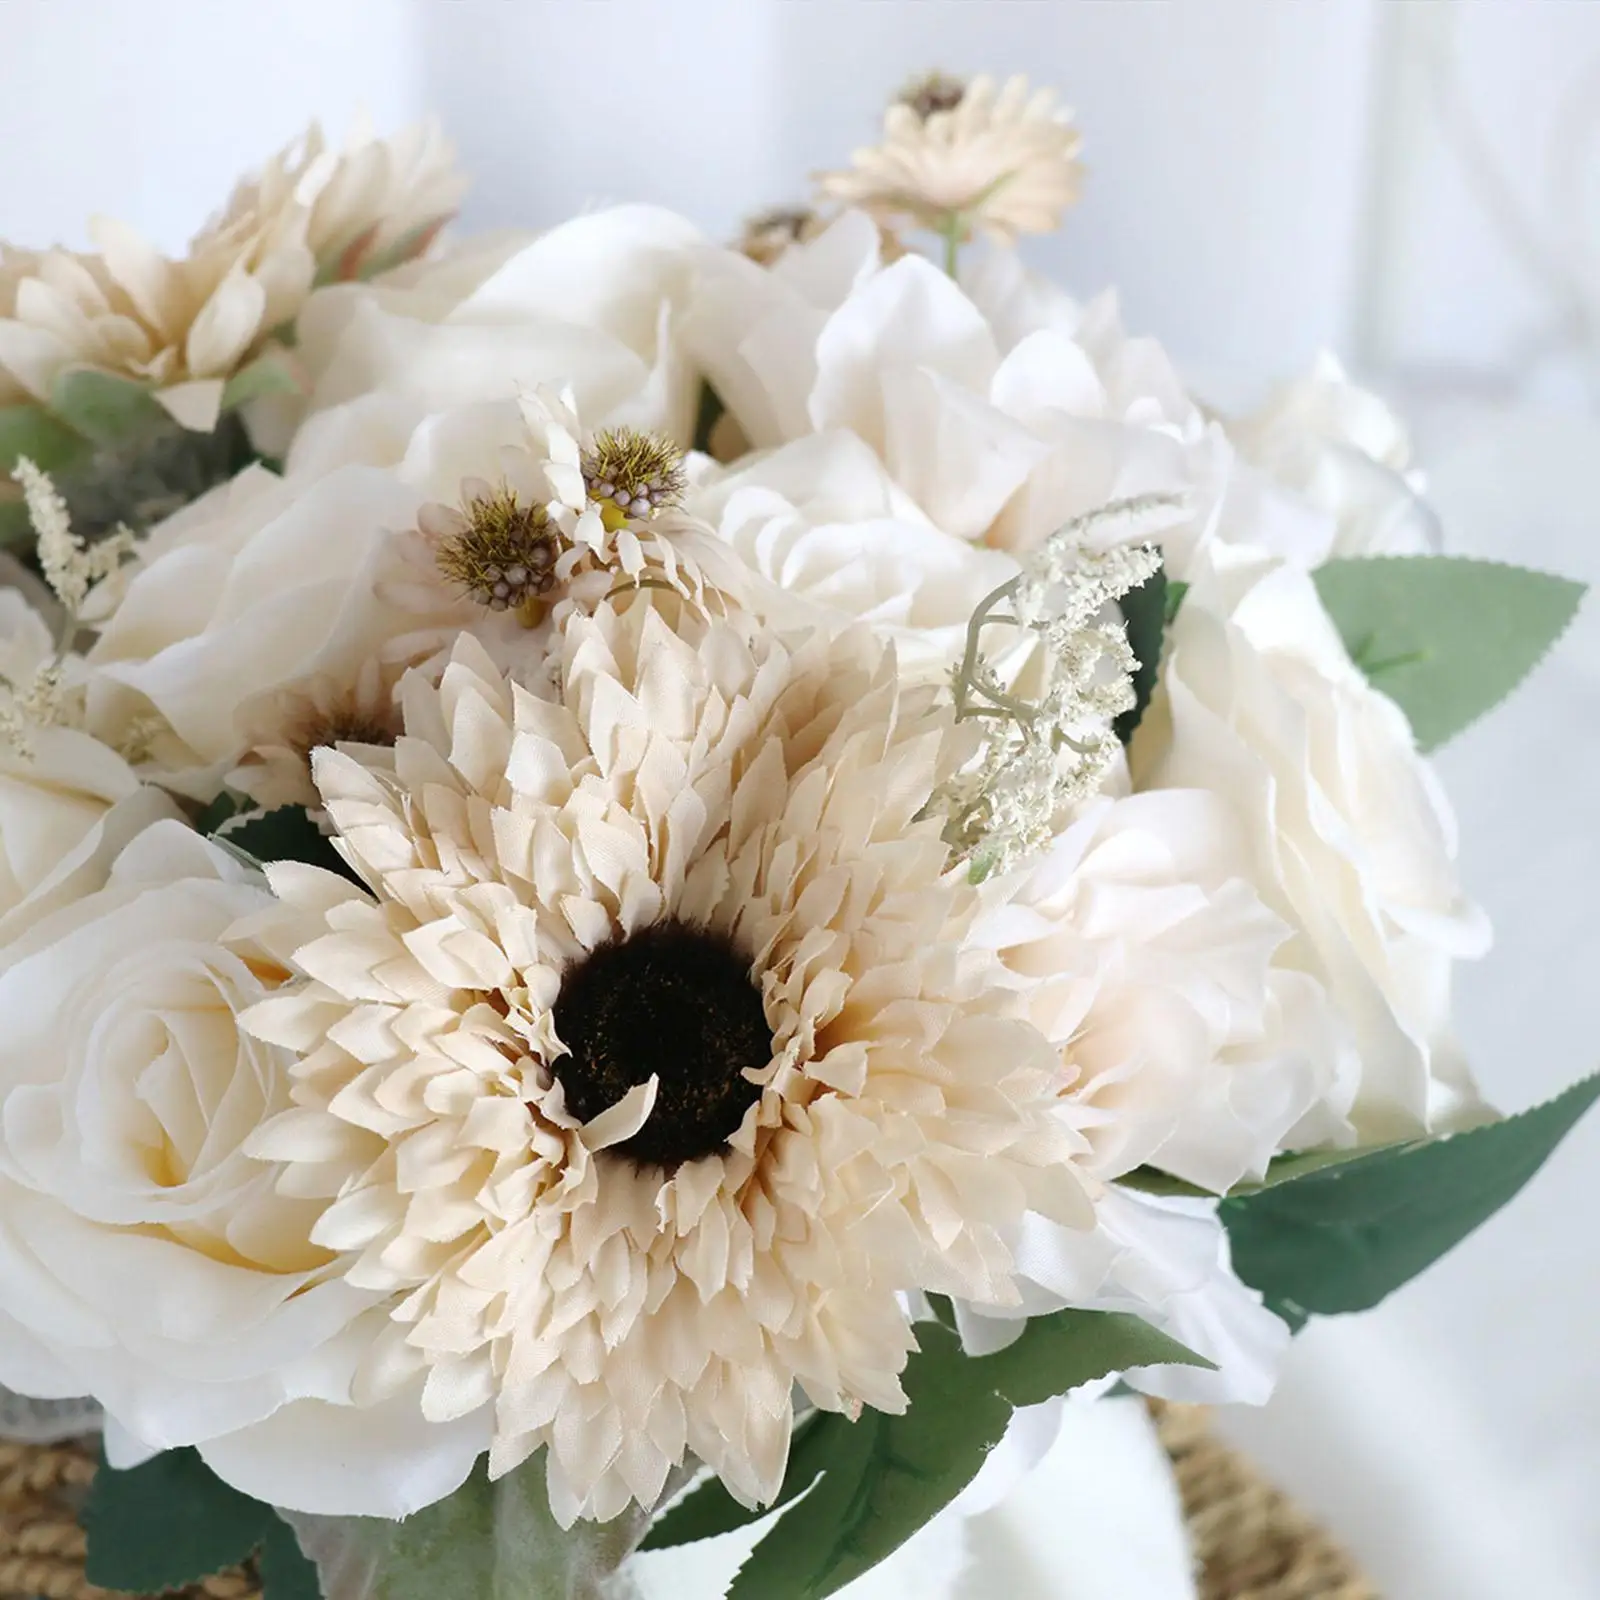 Romantic Bridal Bouquets Cream Color Rose, Sunflowers, Daisy and Leaves Artificial Flowers for Wedding Church Bridal Shower